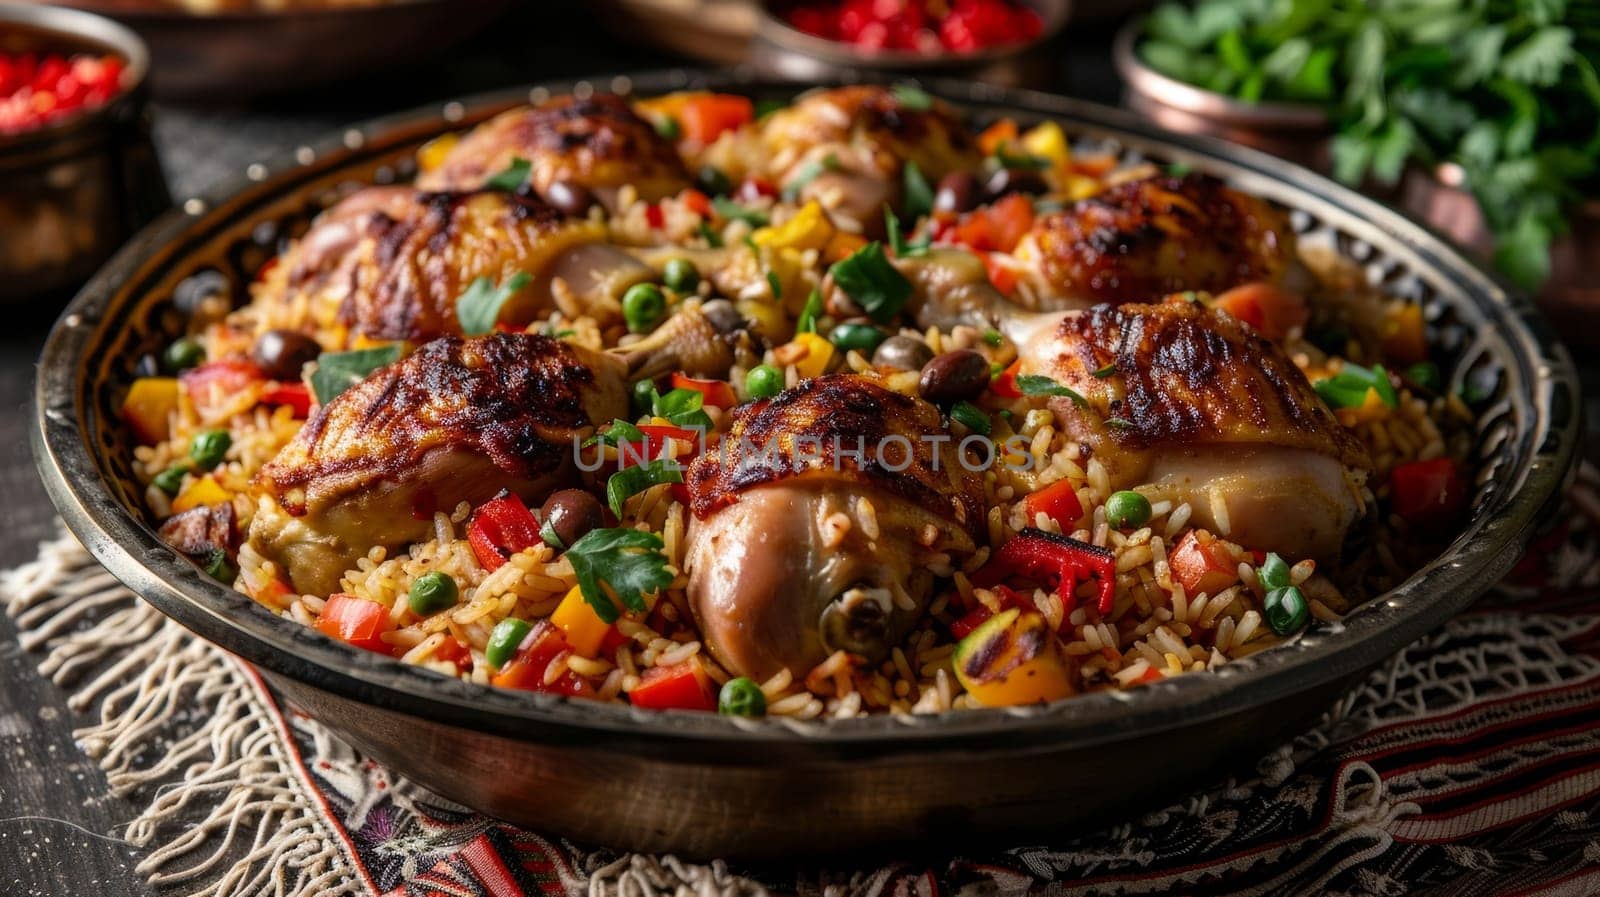 Palestinian maqluba, an upside-down rice cake with chicken and vegetables, served in a large serving dish. A traditional and flavorful dish from Palestine